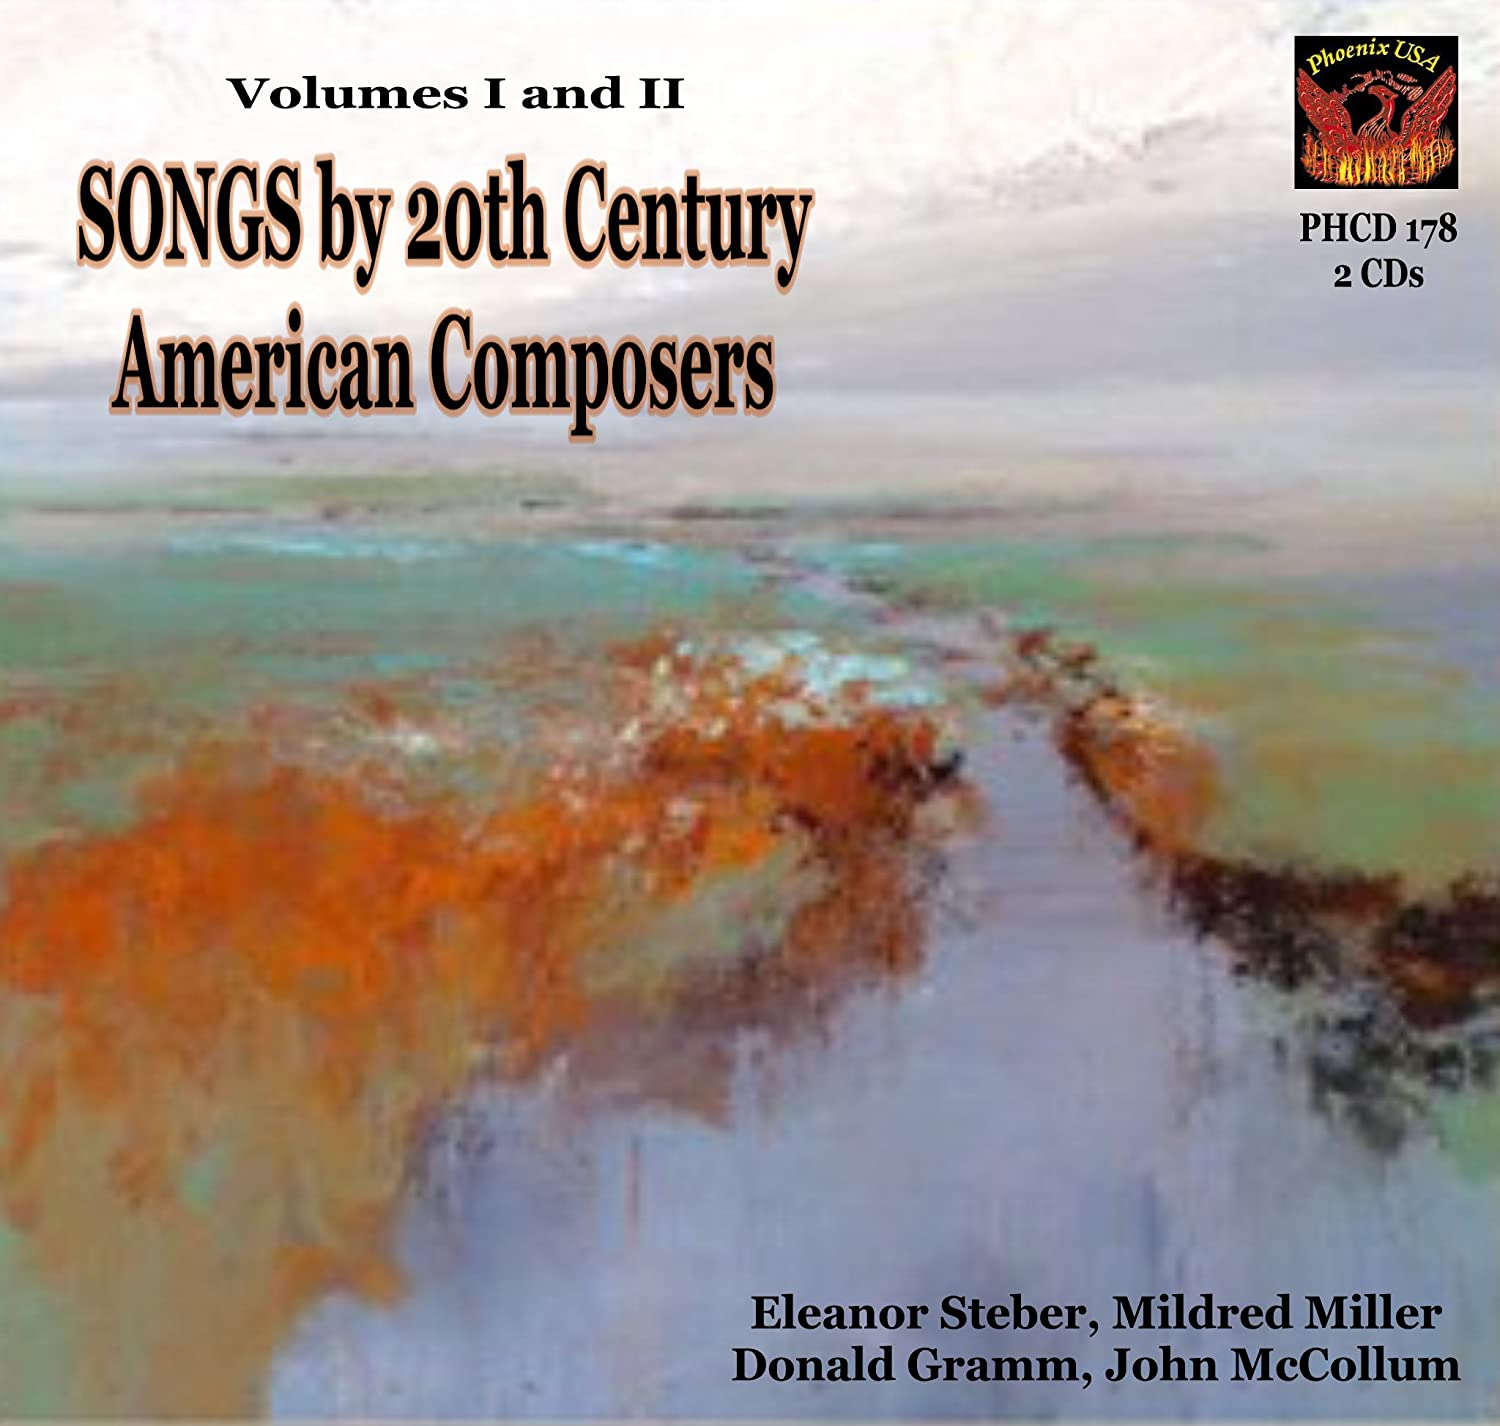 SONGS by 20th century American Composers